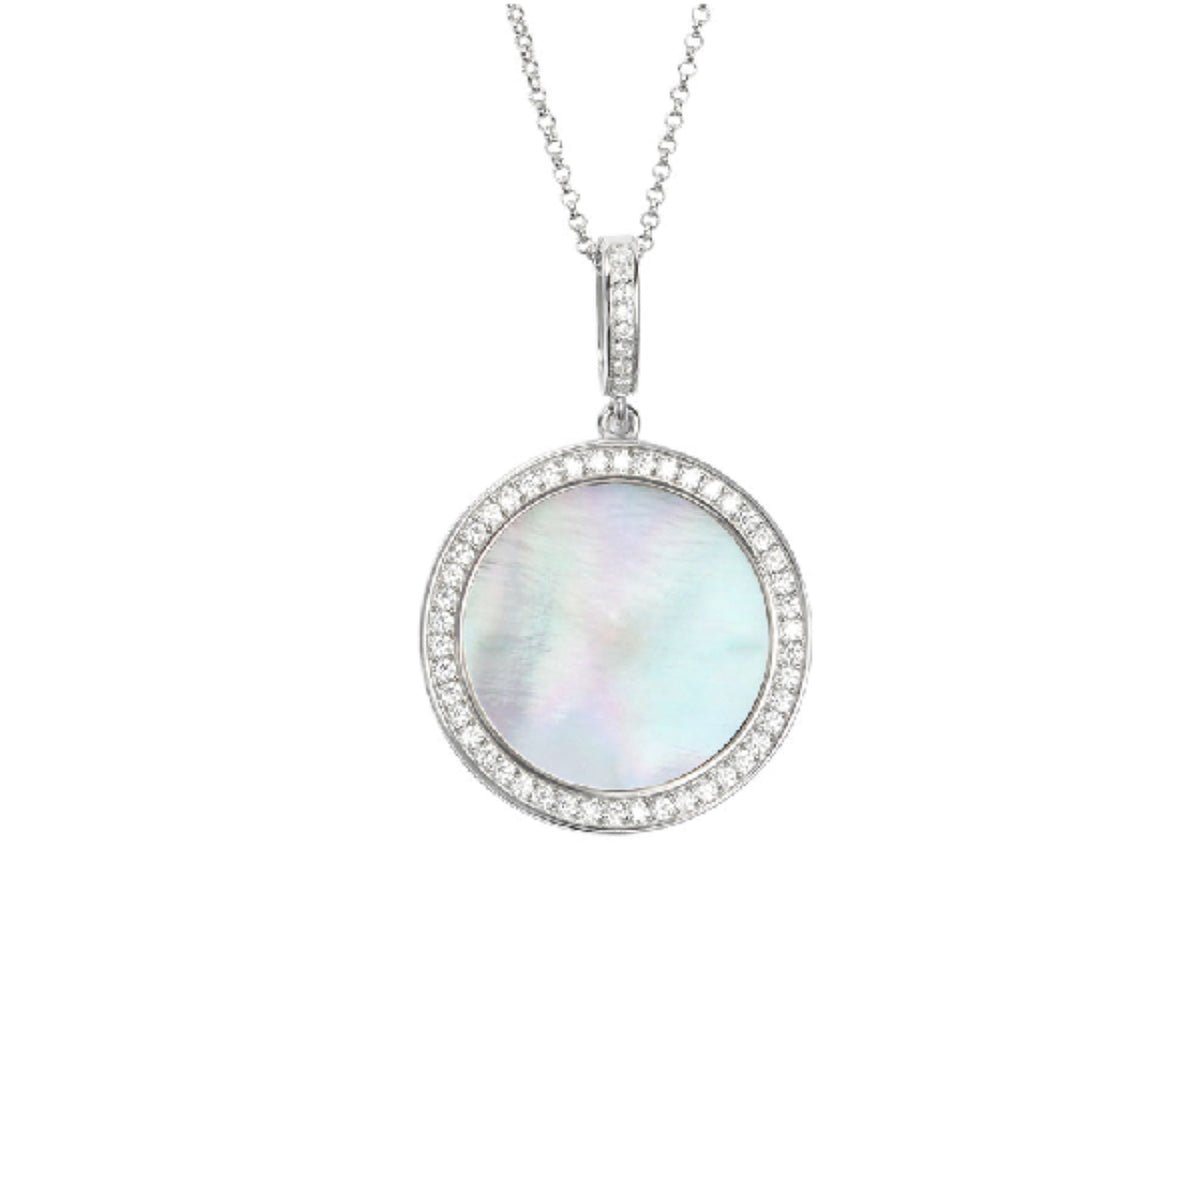 Fantasy Dream Mother-of-Pearl Necklace